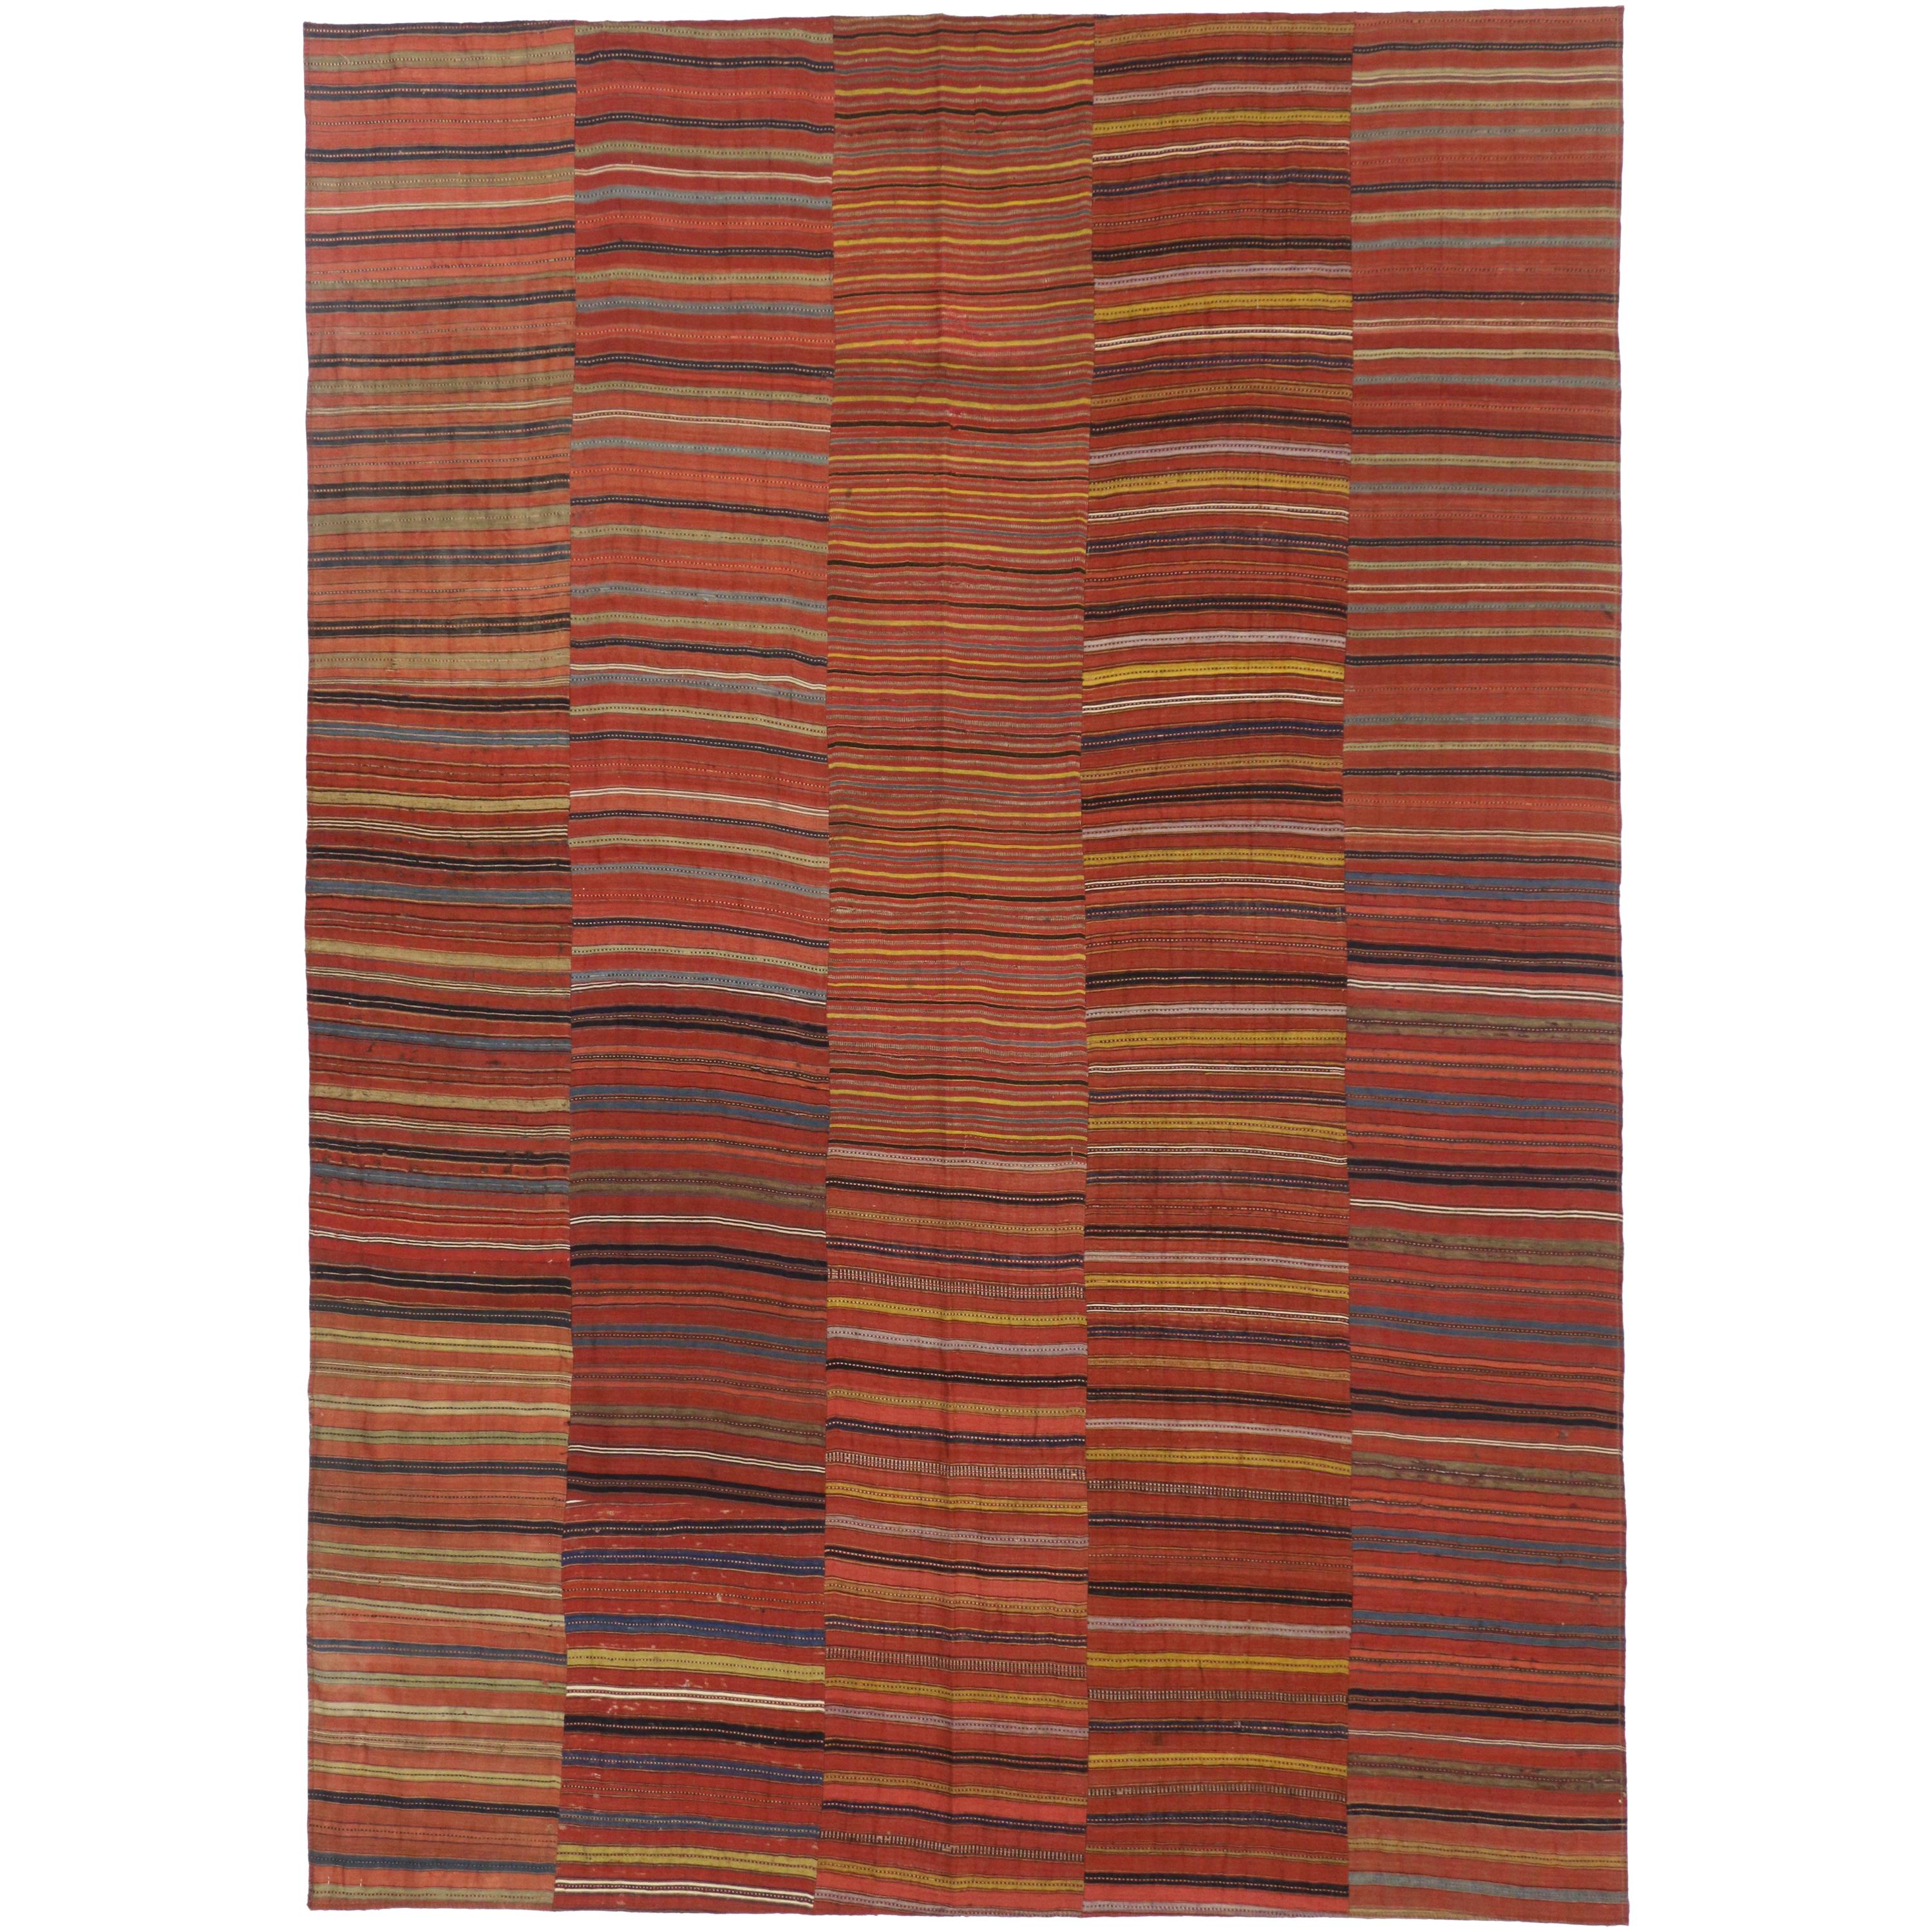 Distressed Vintage Turkish Kilim Rug with Bayadere Stripes and Rustic Style